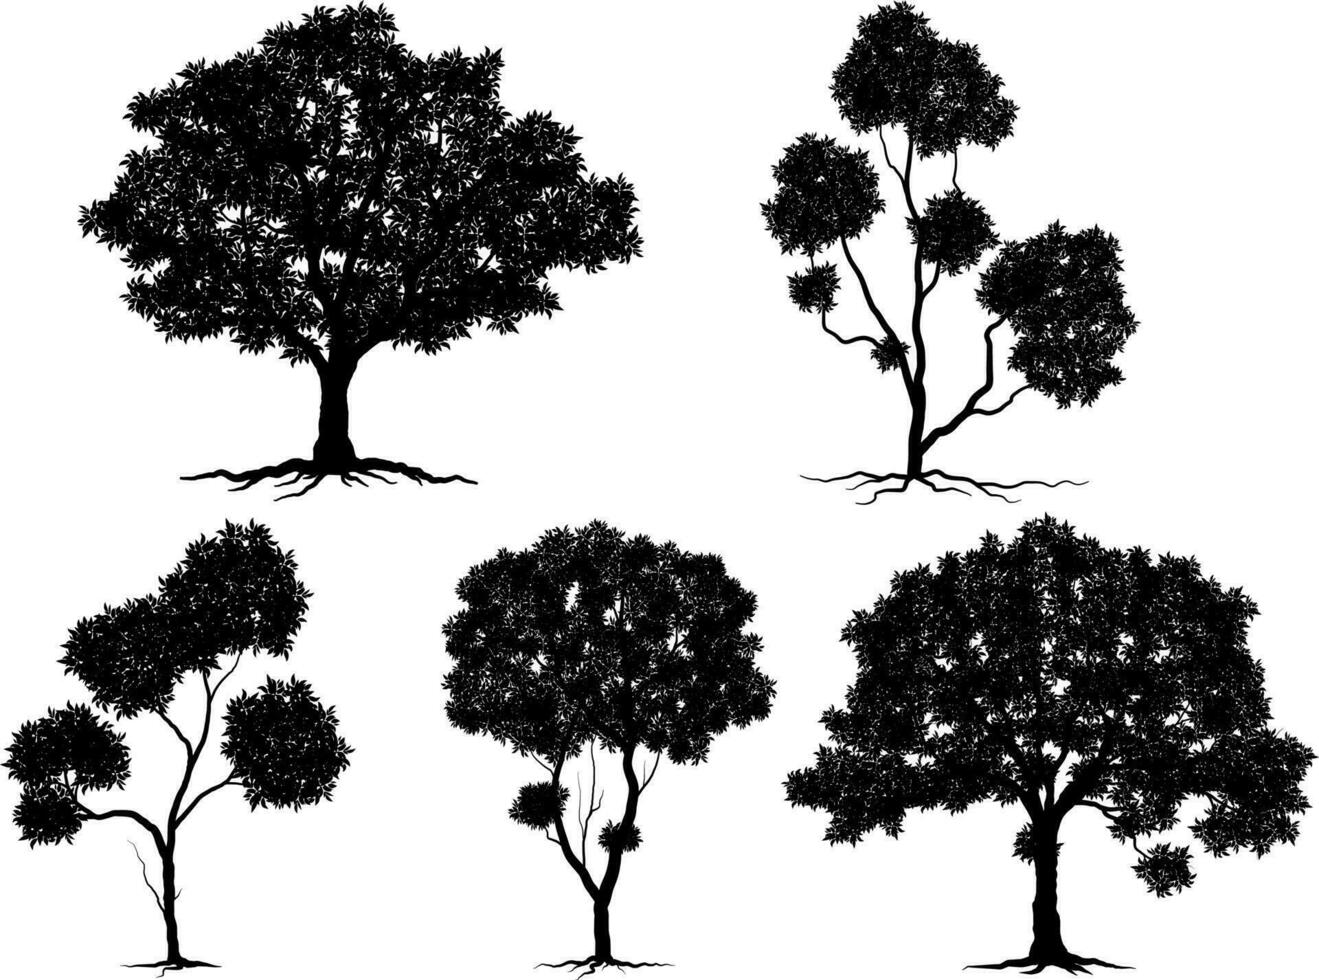 collection isolated tree Symbol silhouette style on white background. Can be used for your work. vector